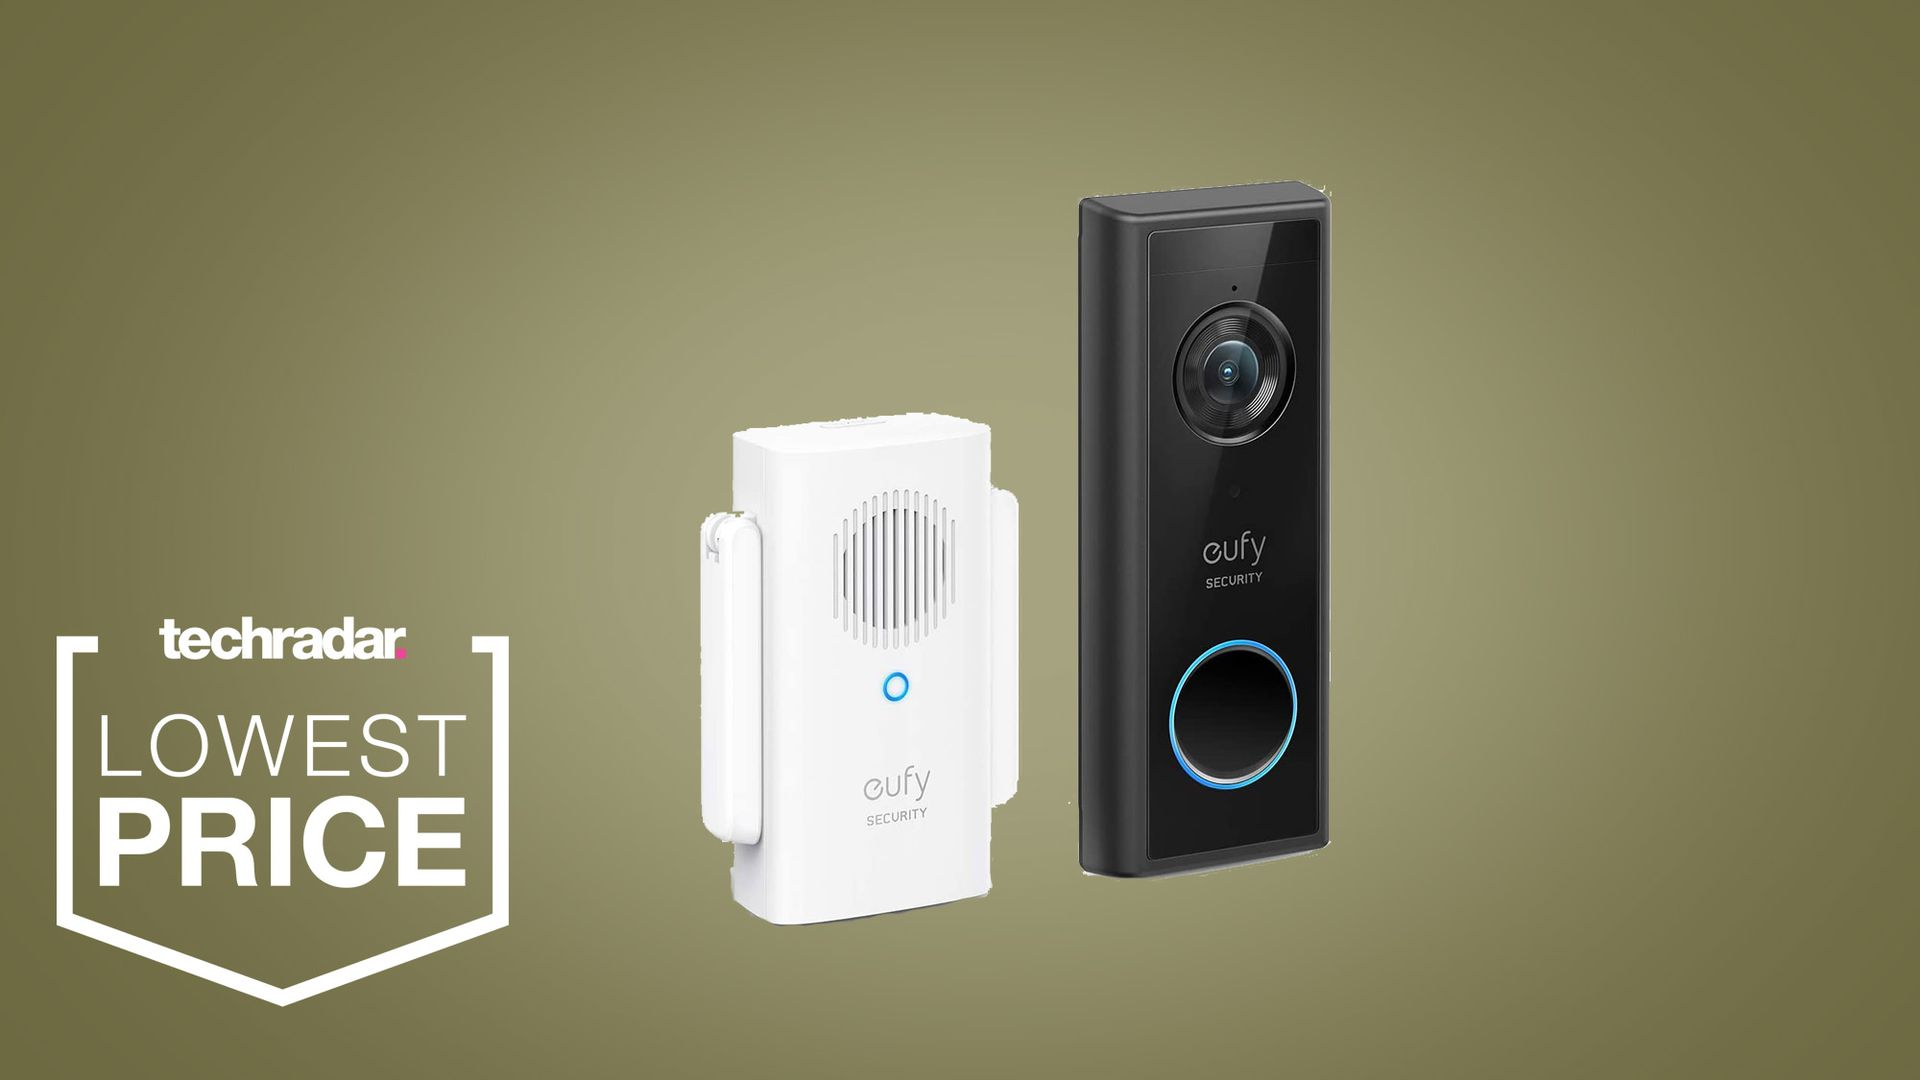 This Eufy video doorbell is back to its lowest-ever price | TechRadar